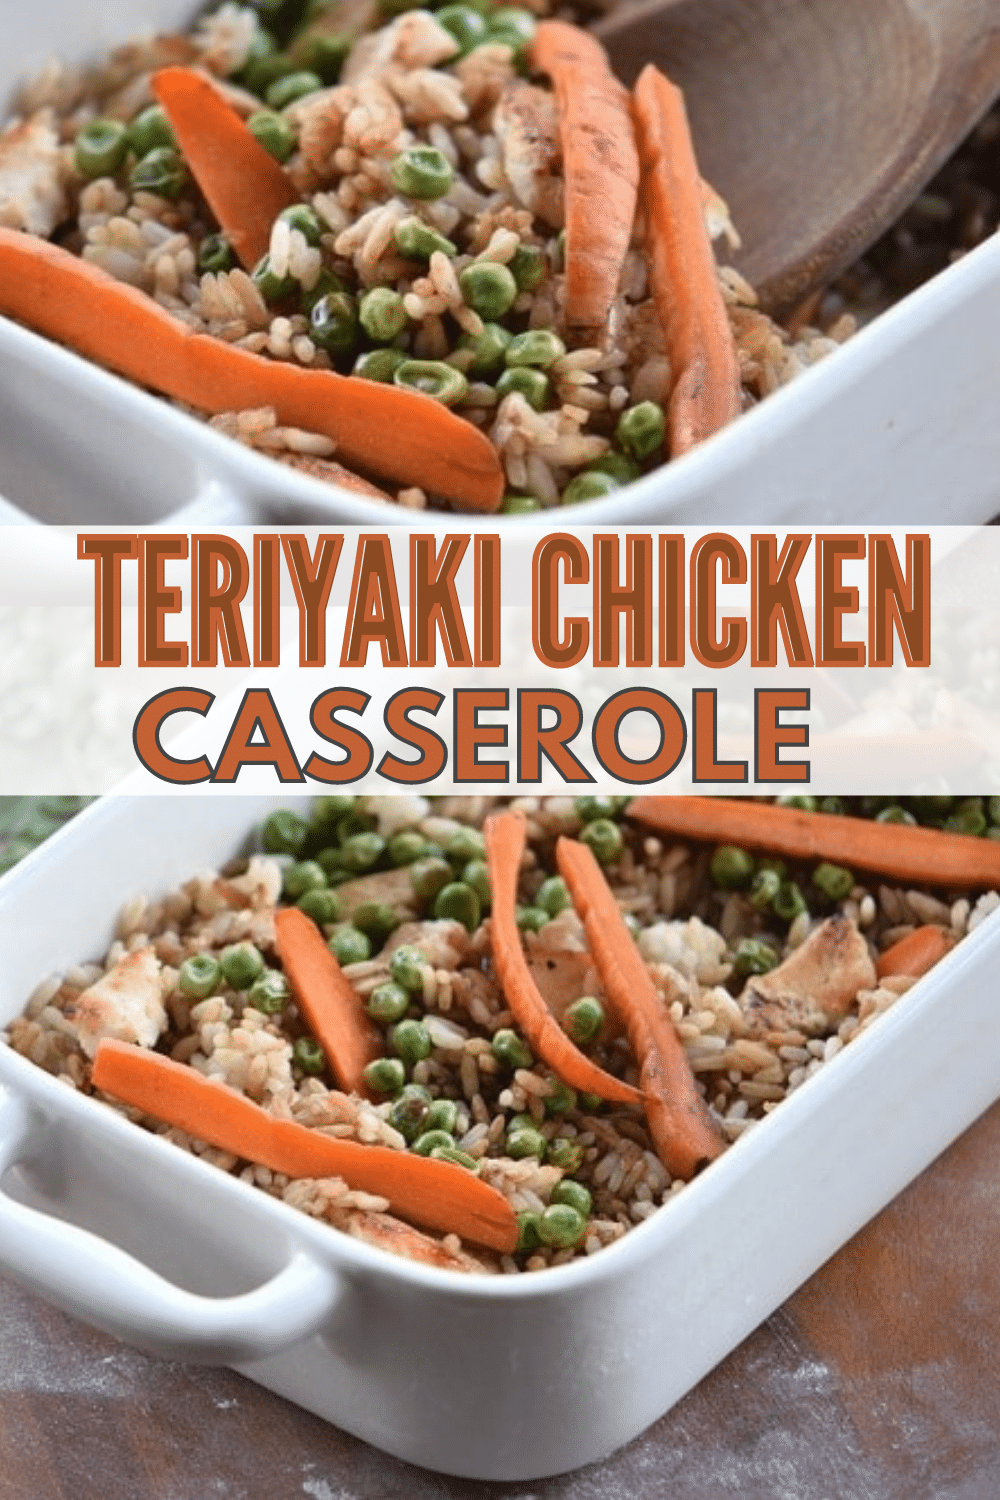 Teriyaki Chicken Casserole is an easy, flavorful dinner that everyone in the family loves. No wok required - the oven does most of the work! #casserole #dinner #teriyakichicken via @wondermomwannab